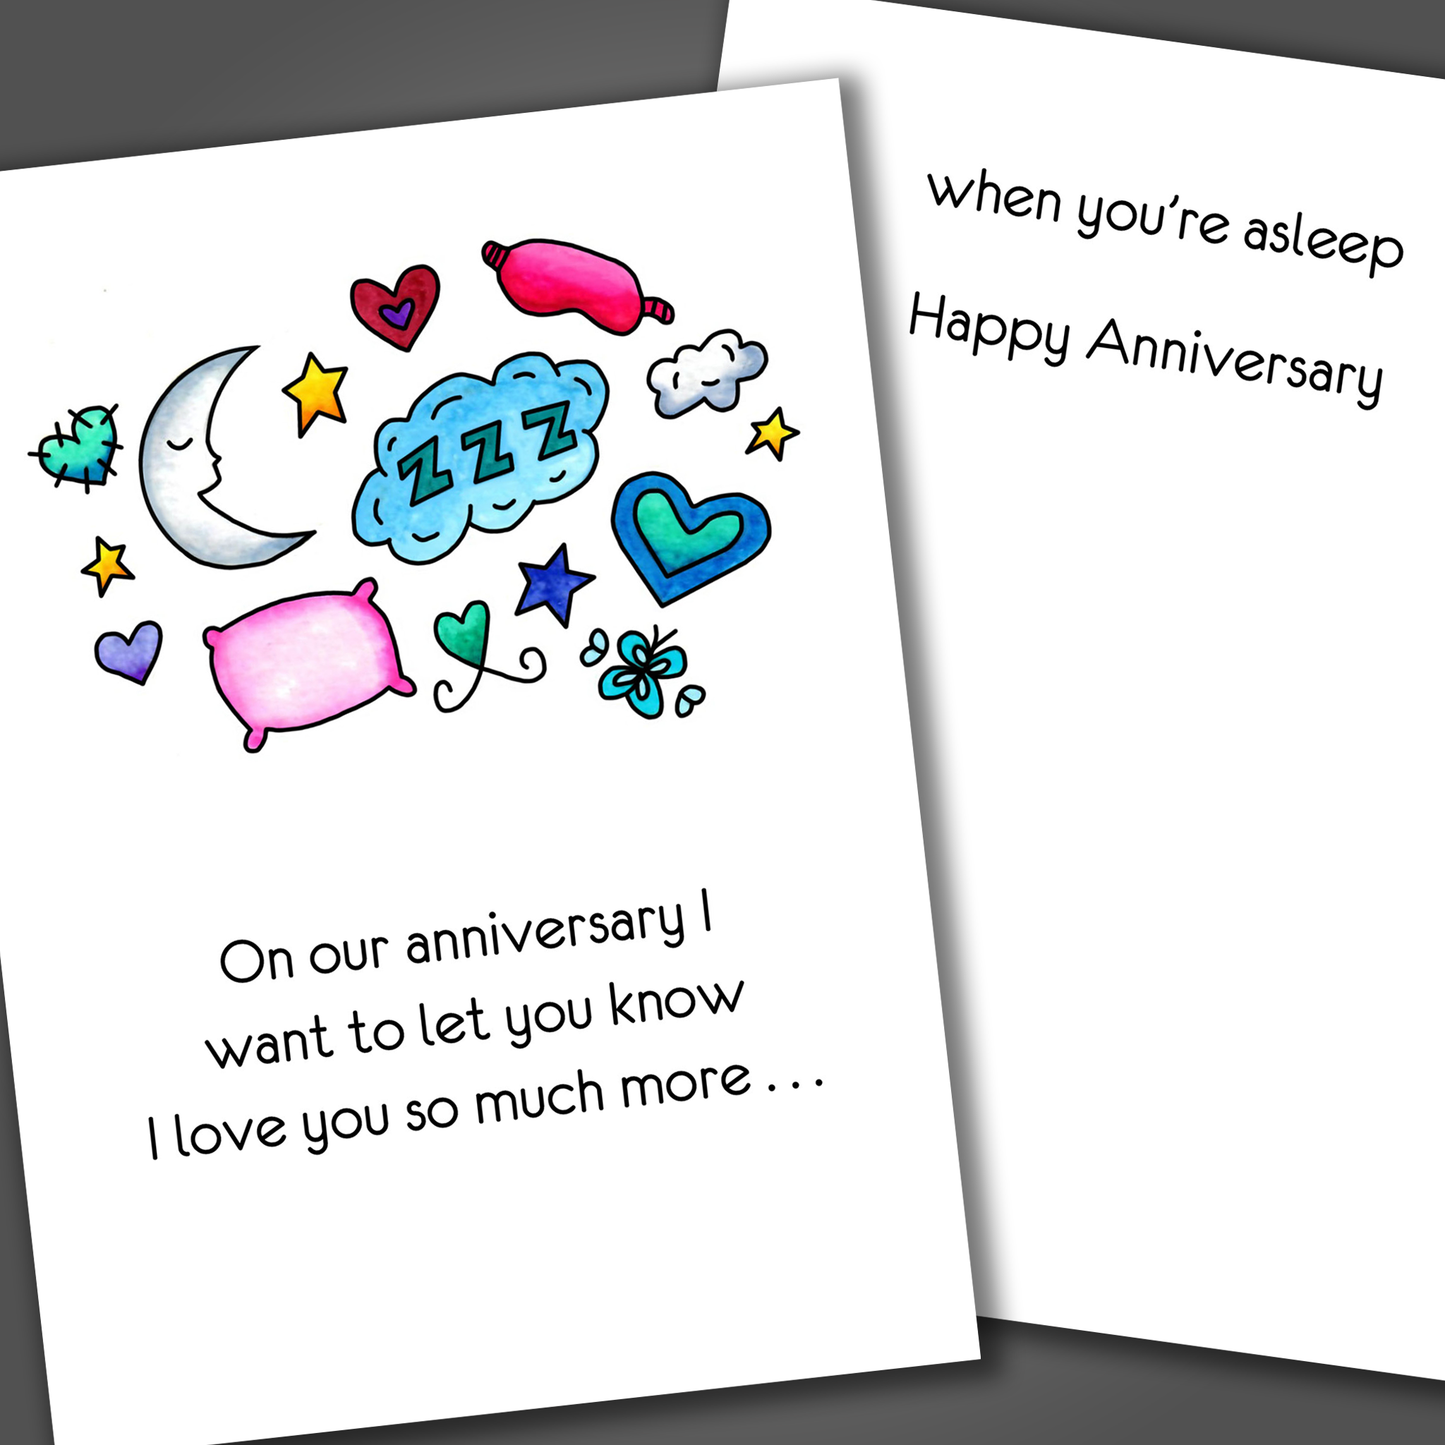 Funny anniversary card with moon and blue hearts on front with a funny joke inside card that ends I love you more when you're asleep!